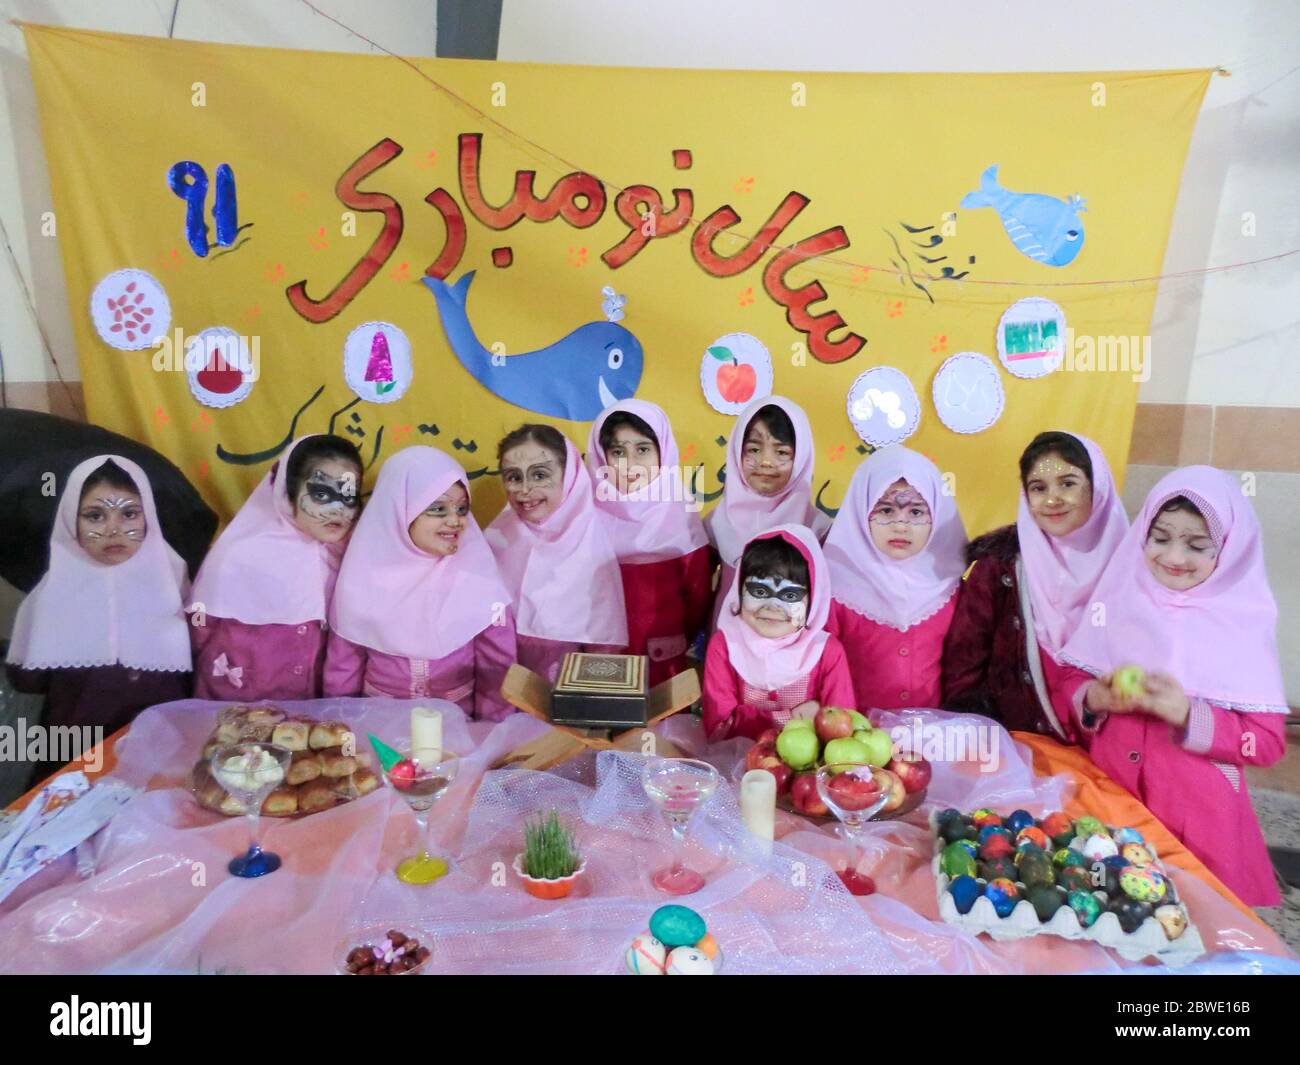 Rasht, Gilan, Iran, 05 05 2019. New Year Celebration at Girls' School in Iran. Nowruz table party with female students. Painted faces of students at t Stock Photo